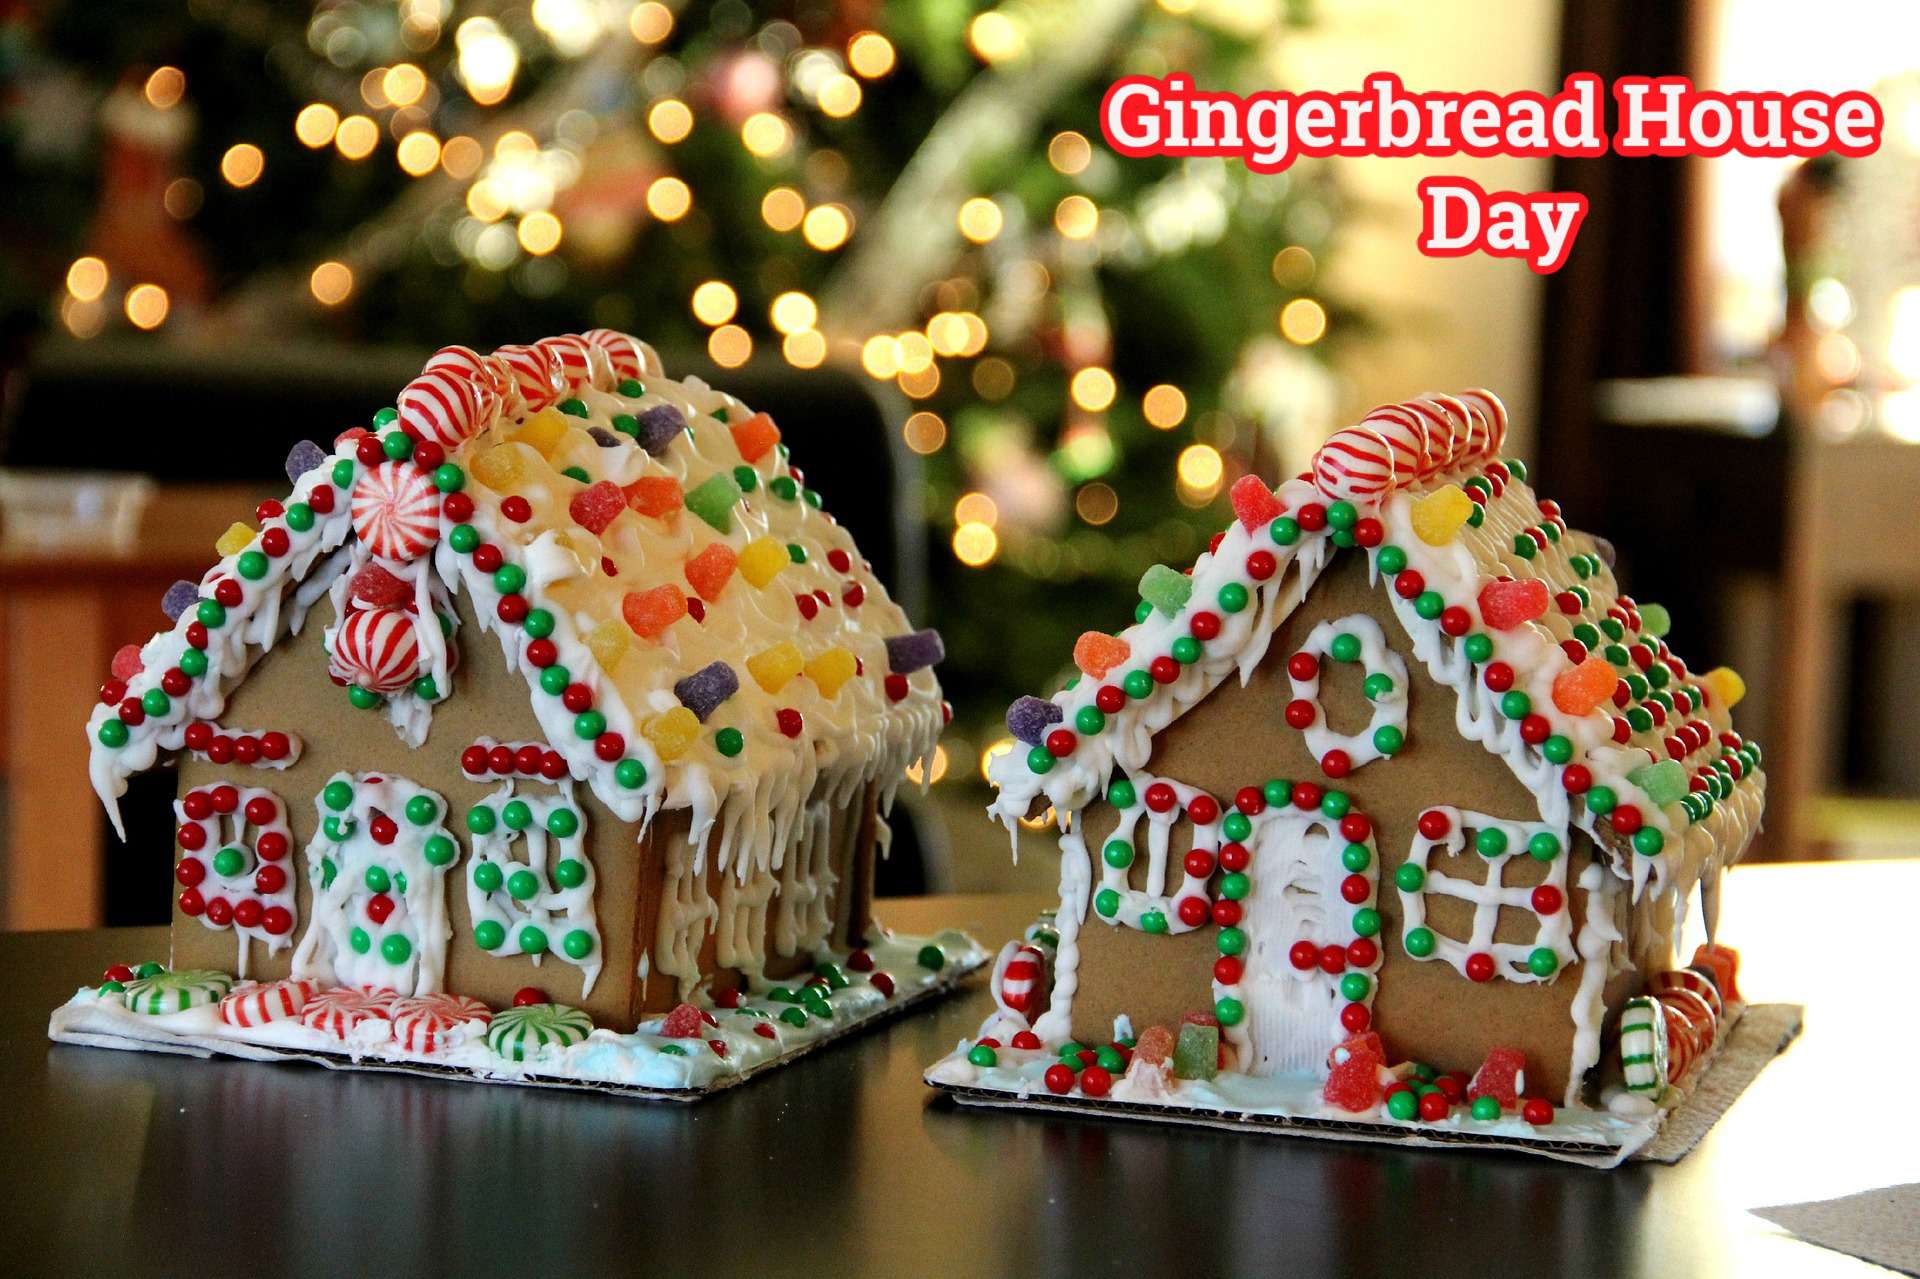 Gingerbread House Day Wishes Unique Image